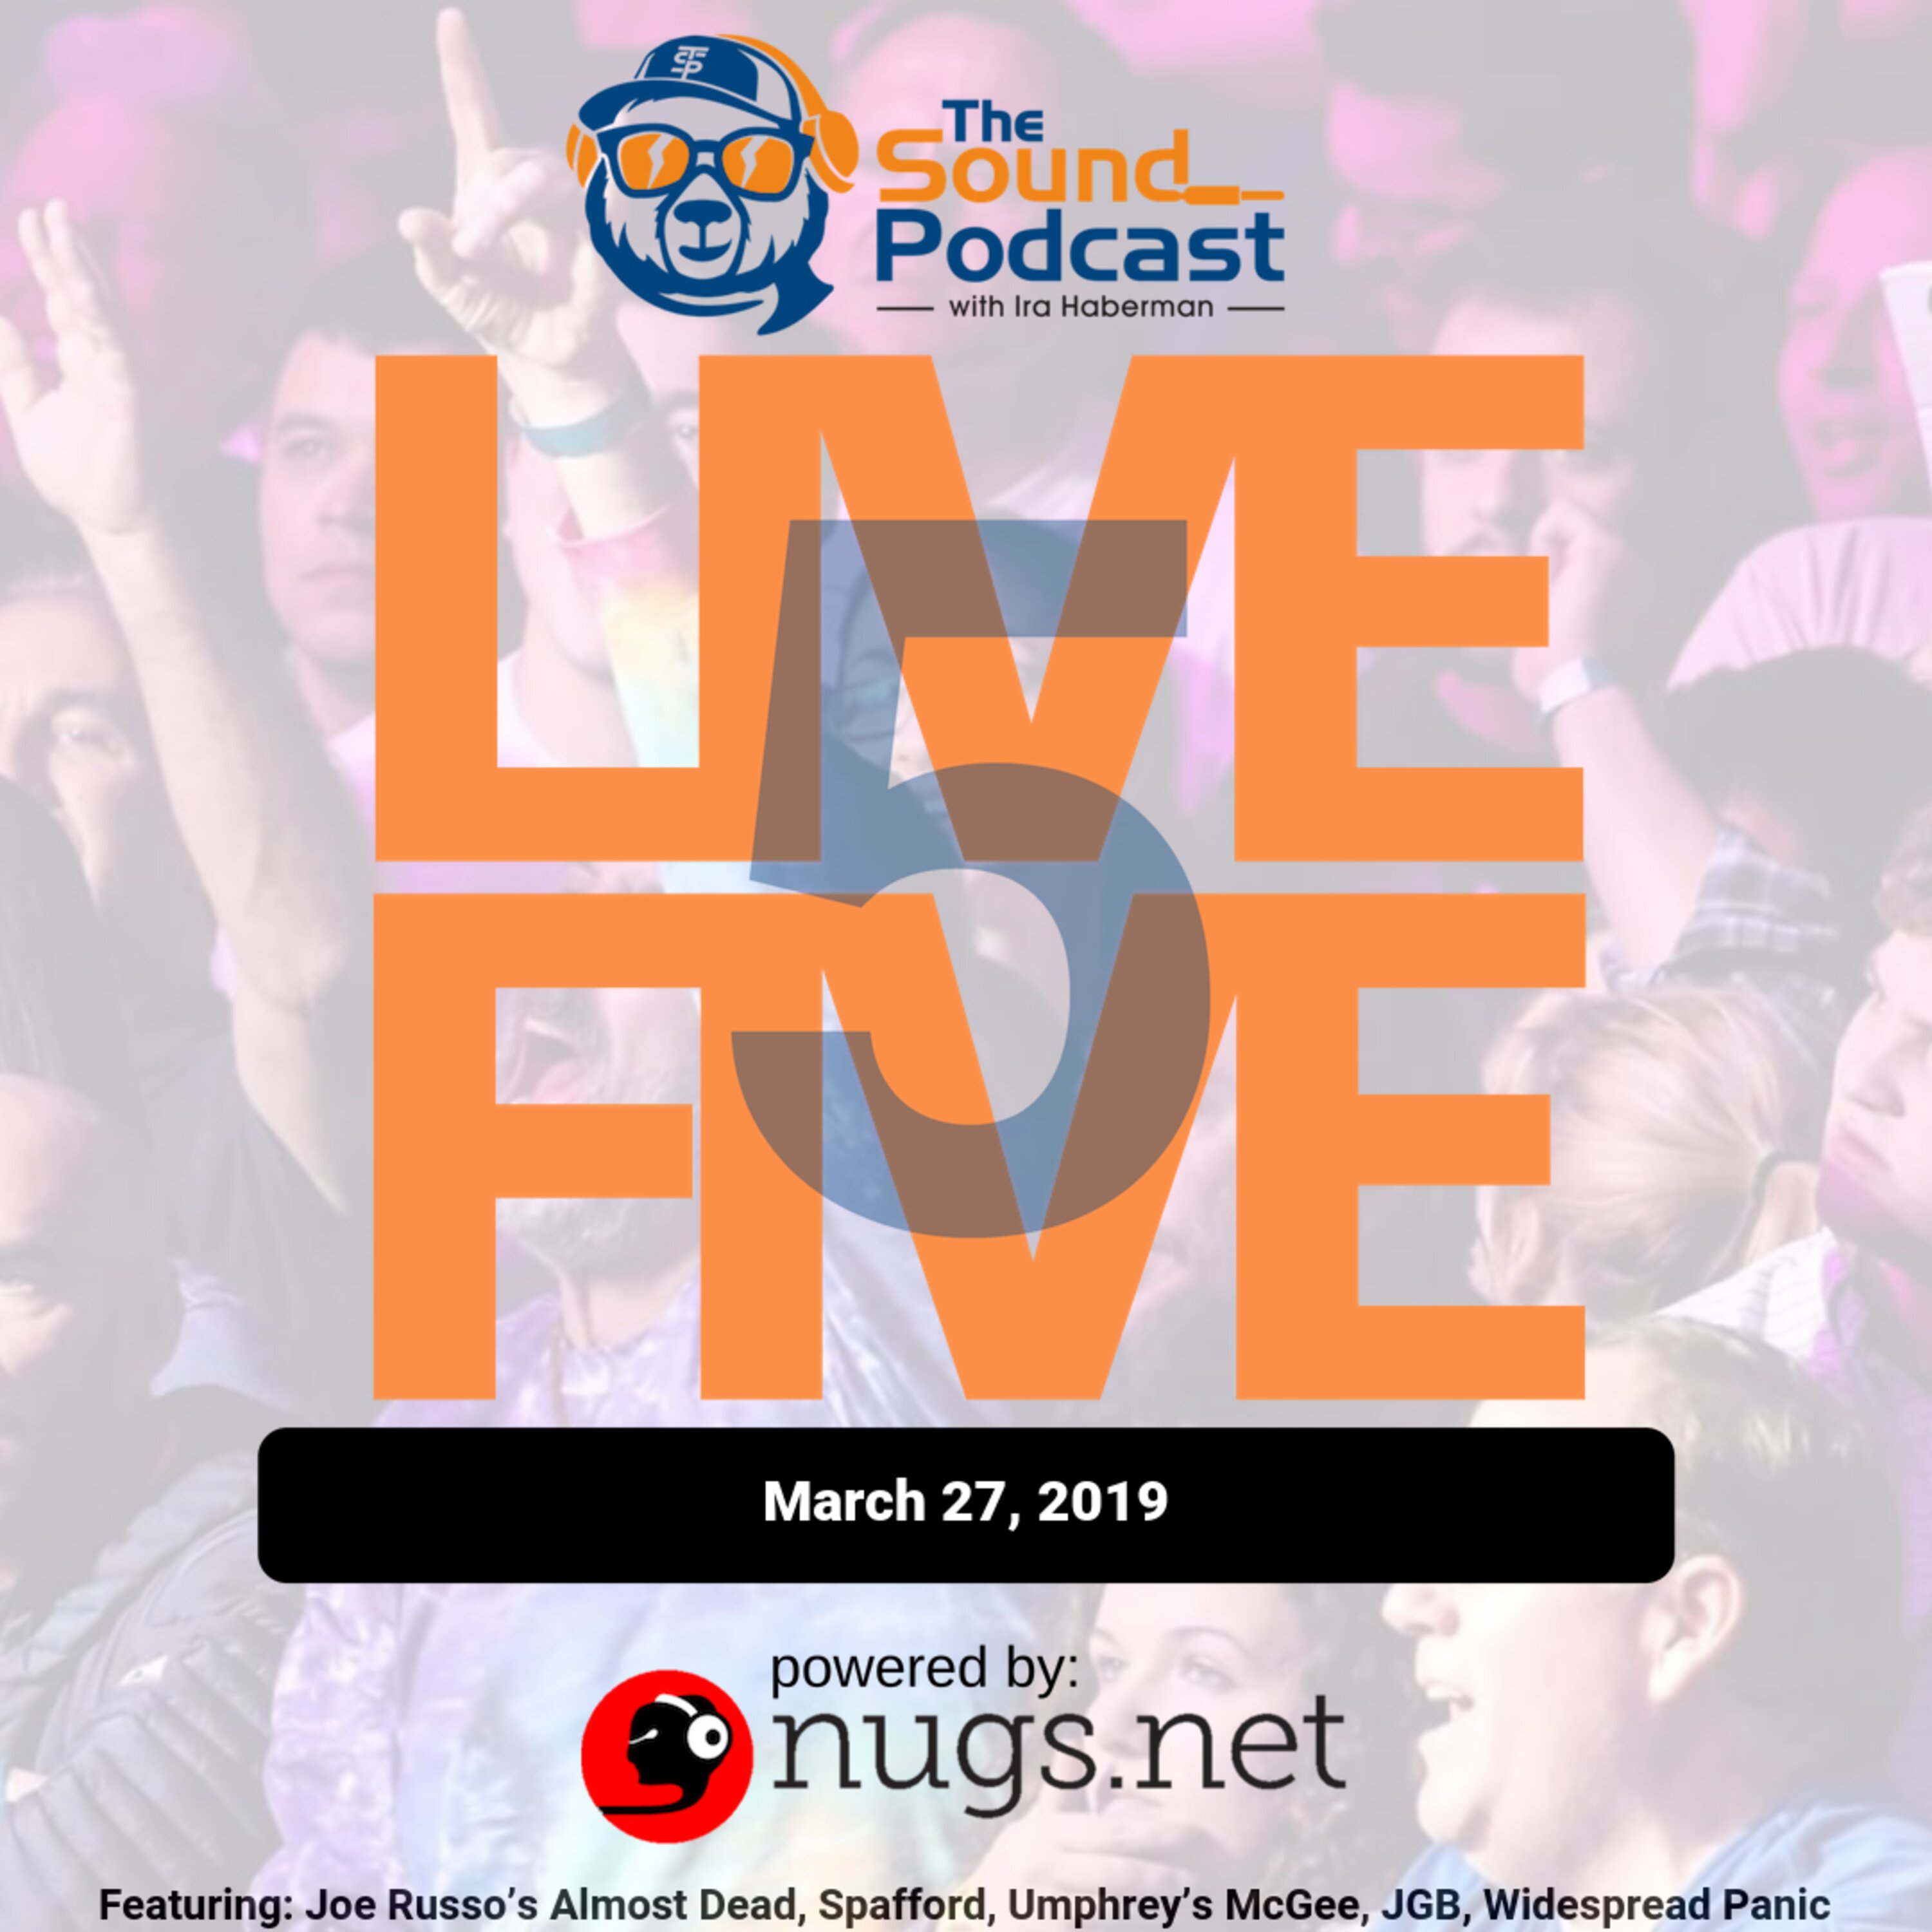 Live 5 - March 27, 2019. Image